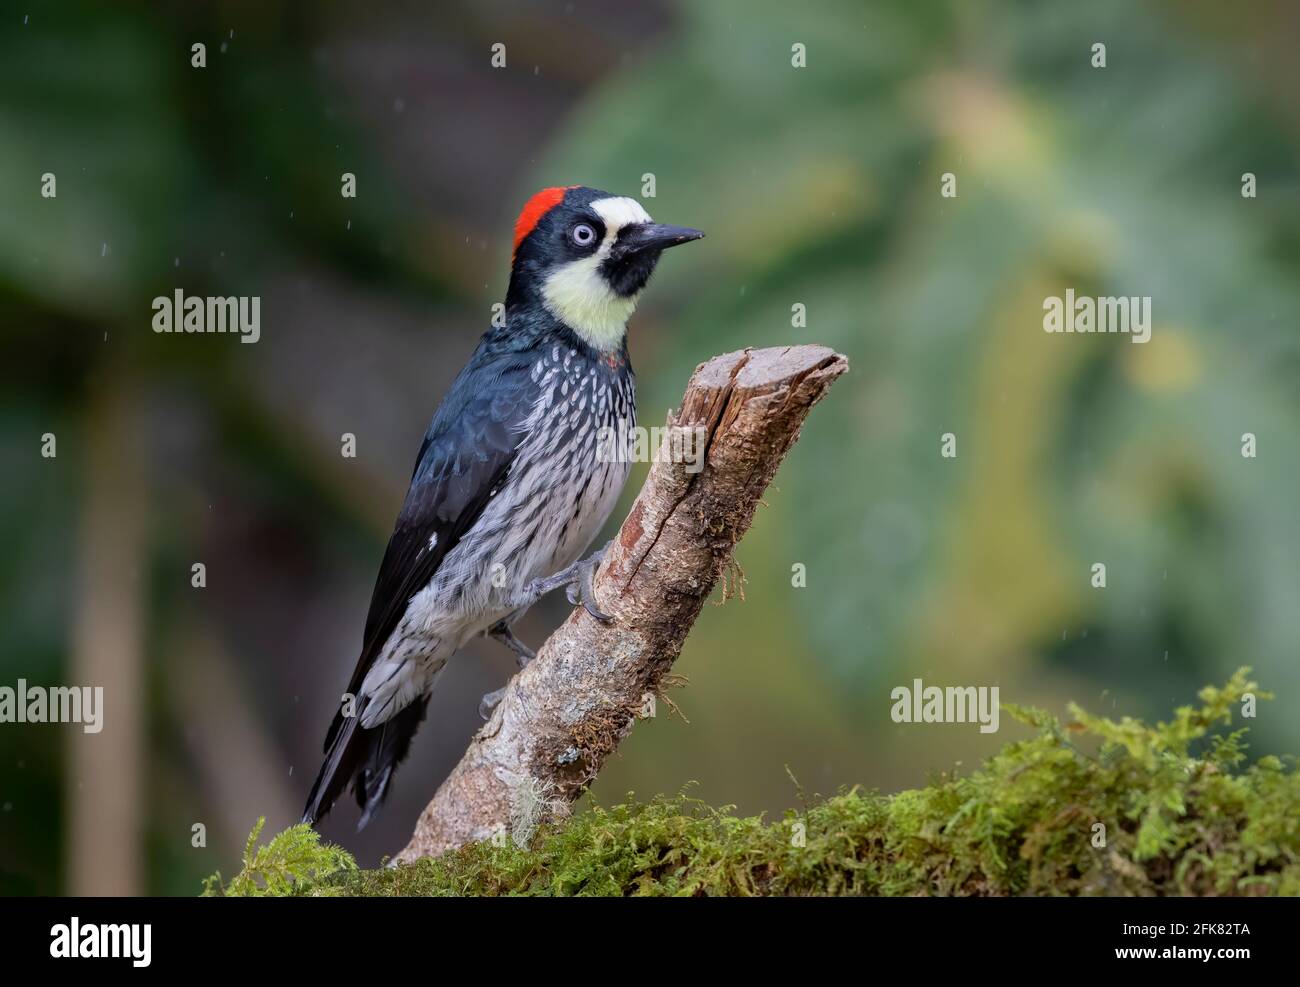 Acorn woodpecker (Melanerpes formicivorus) perched on a branch in the jungles of Costa Rica. Stock Photo